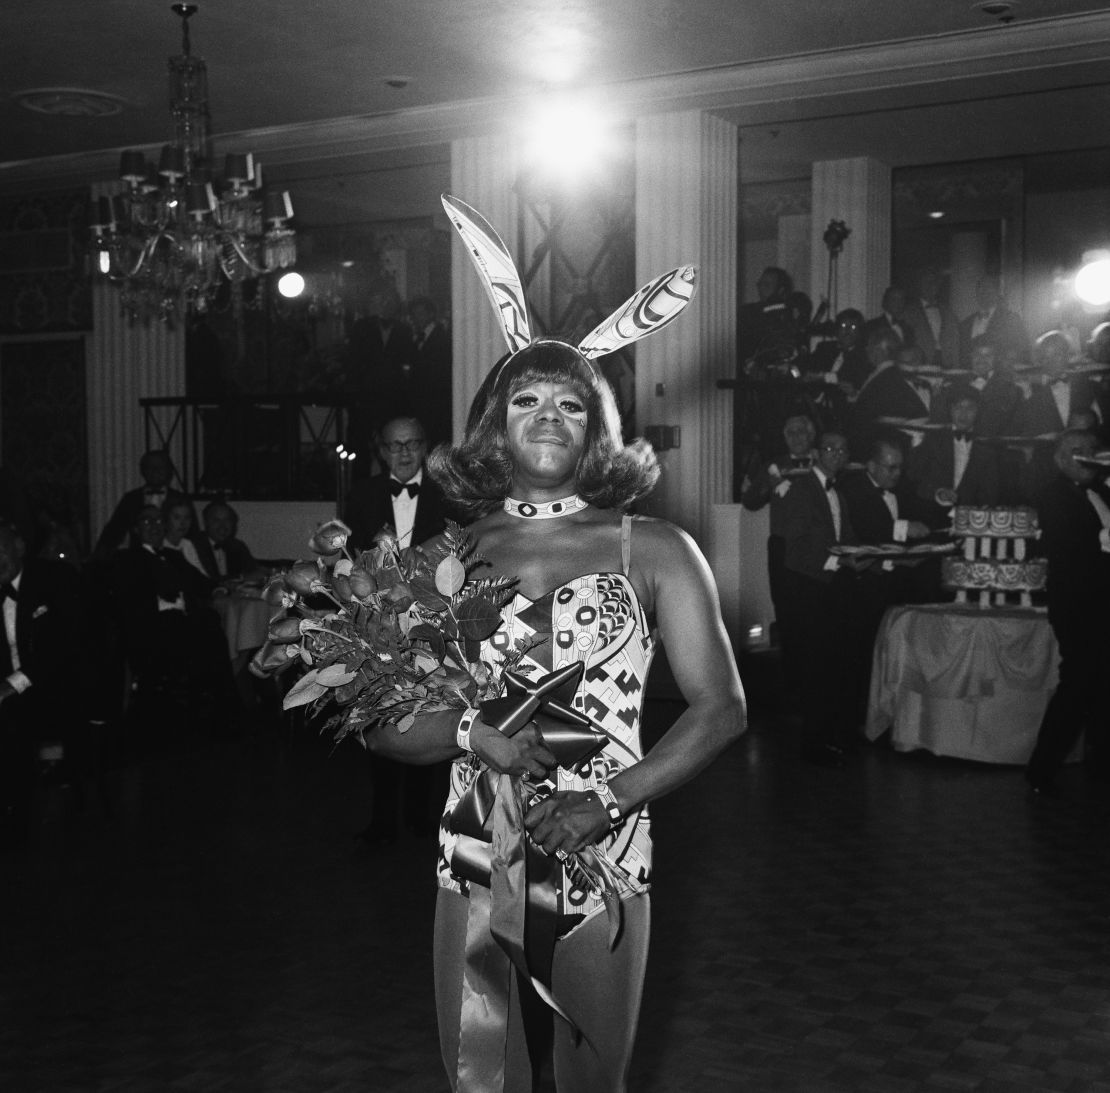 Before there was Tyler Perry's Madea, there was comedian Flip Wilson's "Geraldine." Wilson's character was a gender bending star of his popular television variety show.